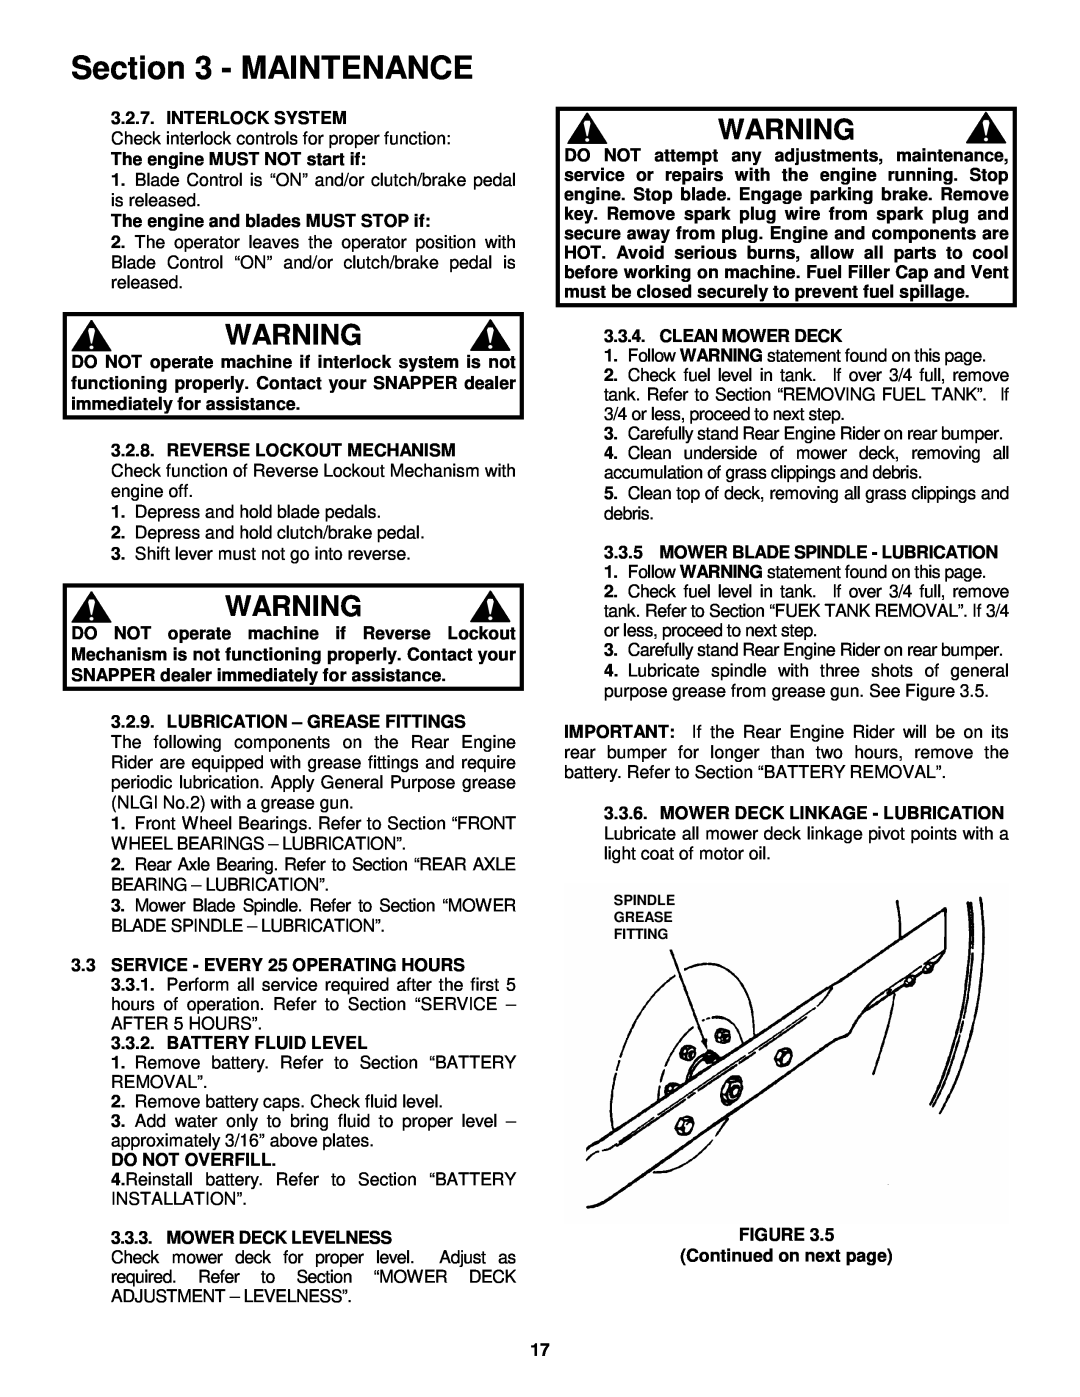 Snapper EM250821BE, EM281021BE important safety instructions Maintenance, Spindle Grease Fitting 